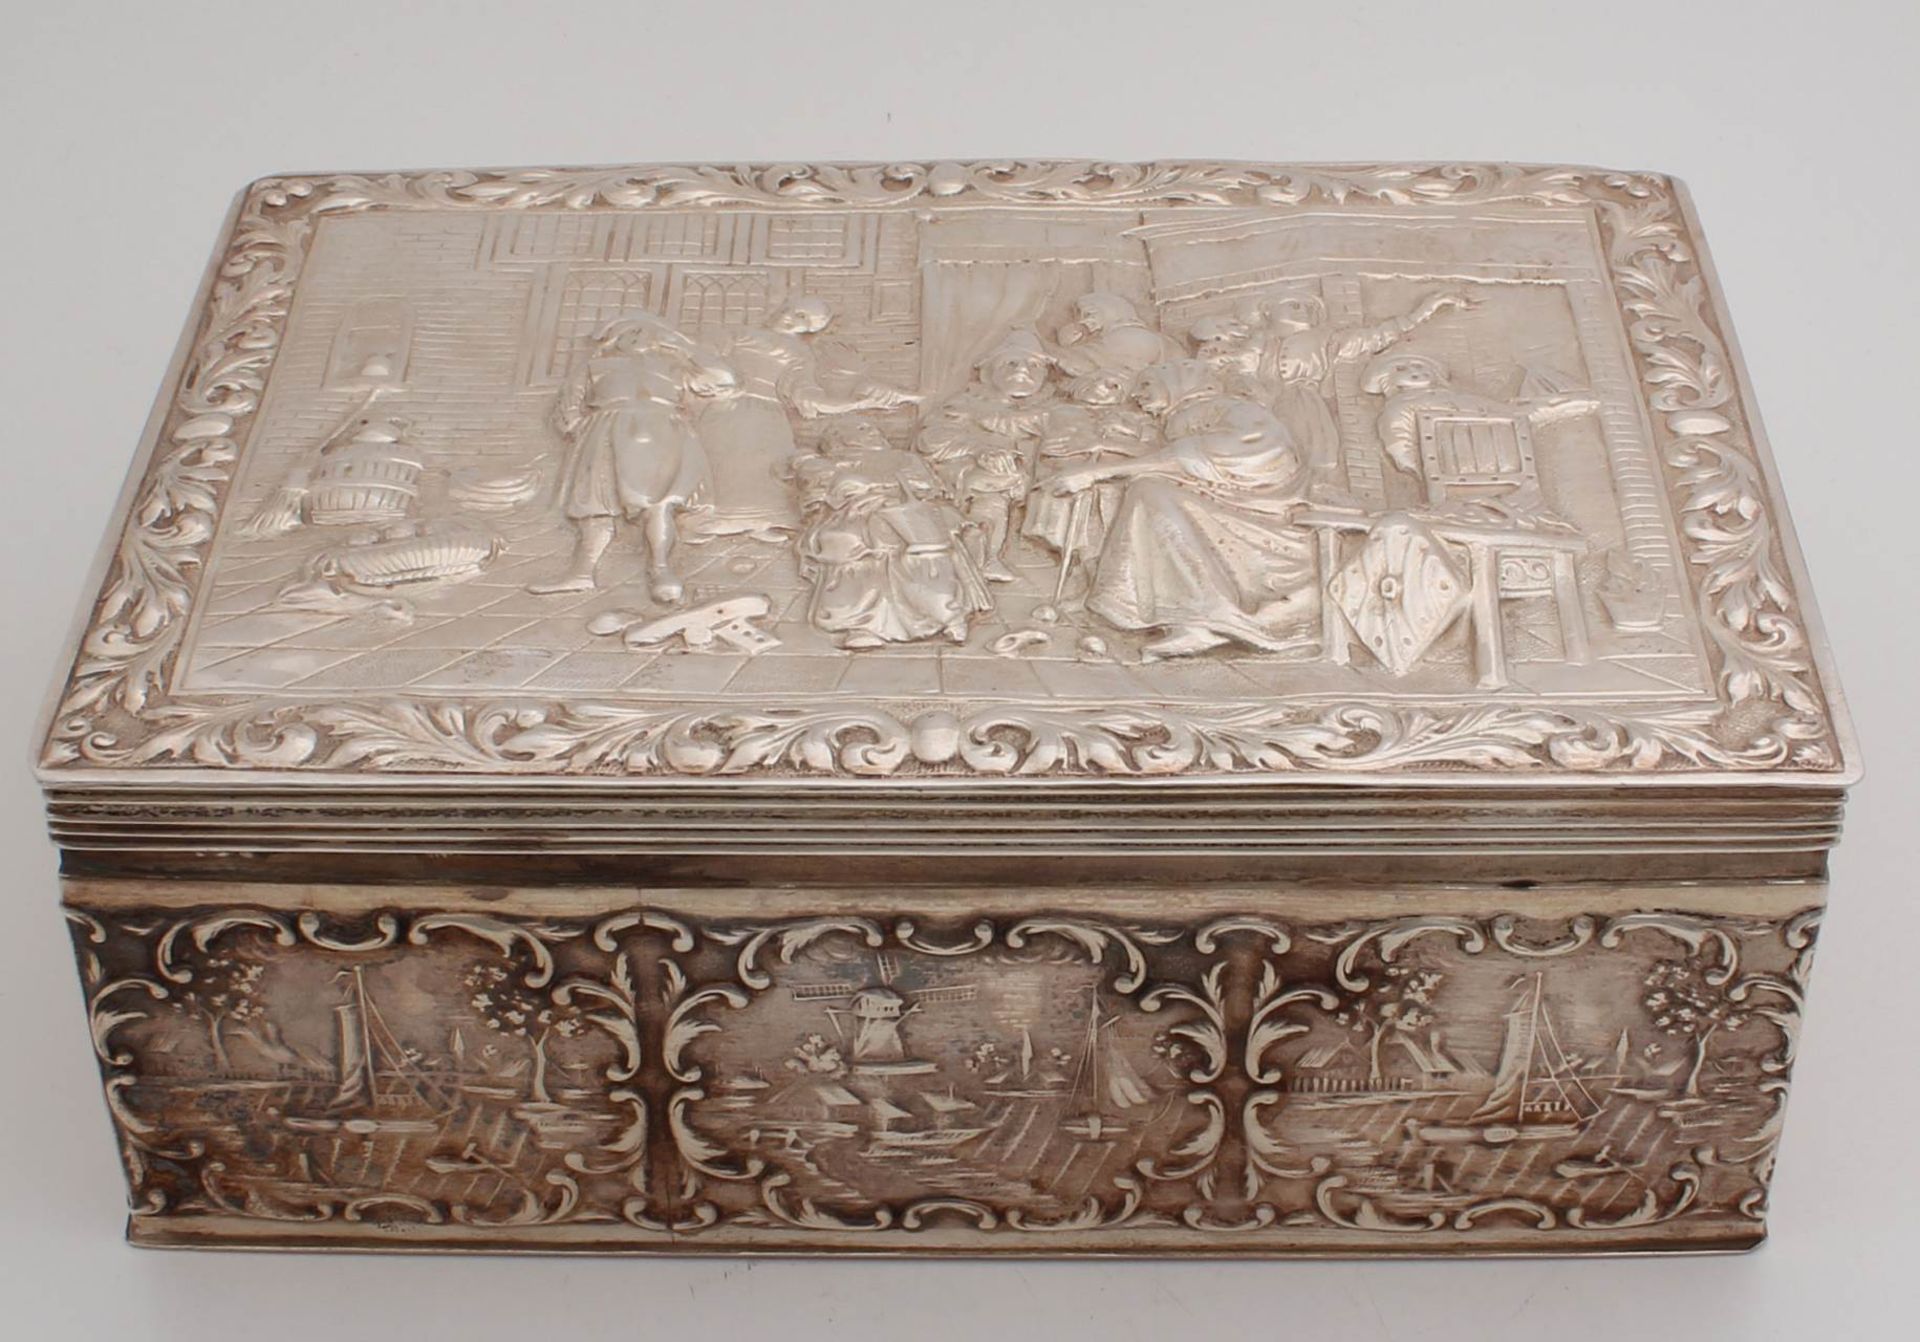 Very fine biscuit tin, silver, 835/000. A richly driven rectangular drum with hinged lid includes